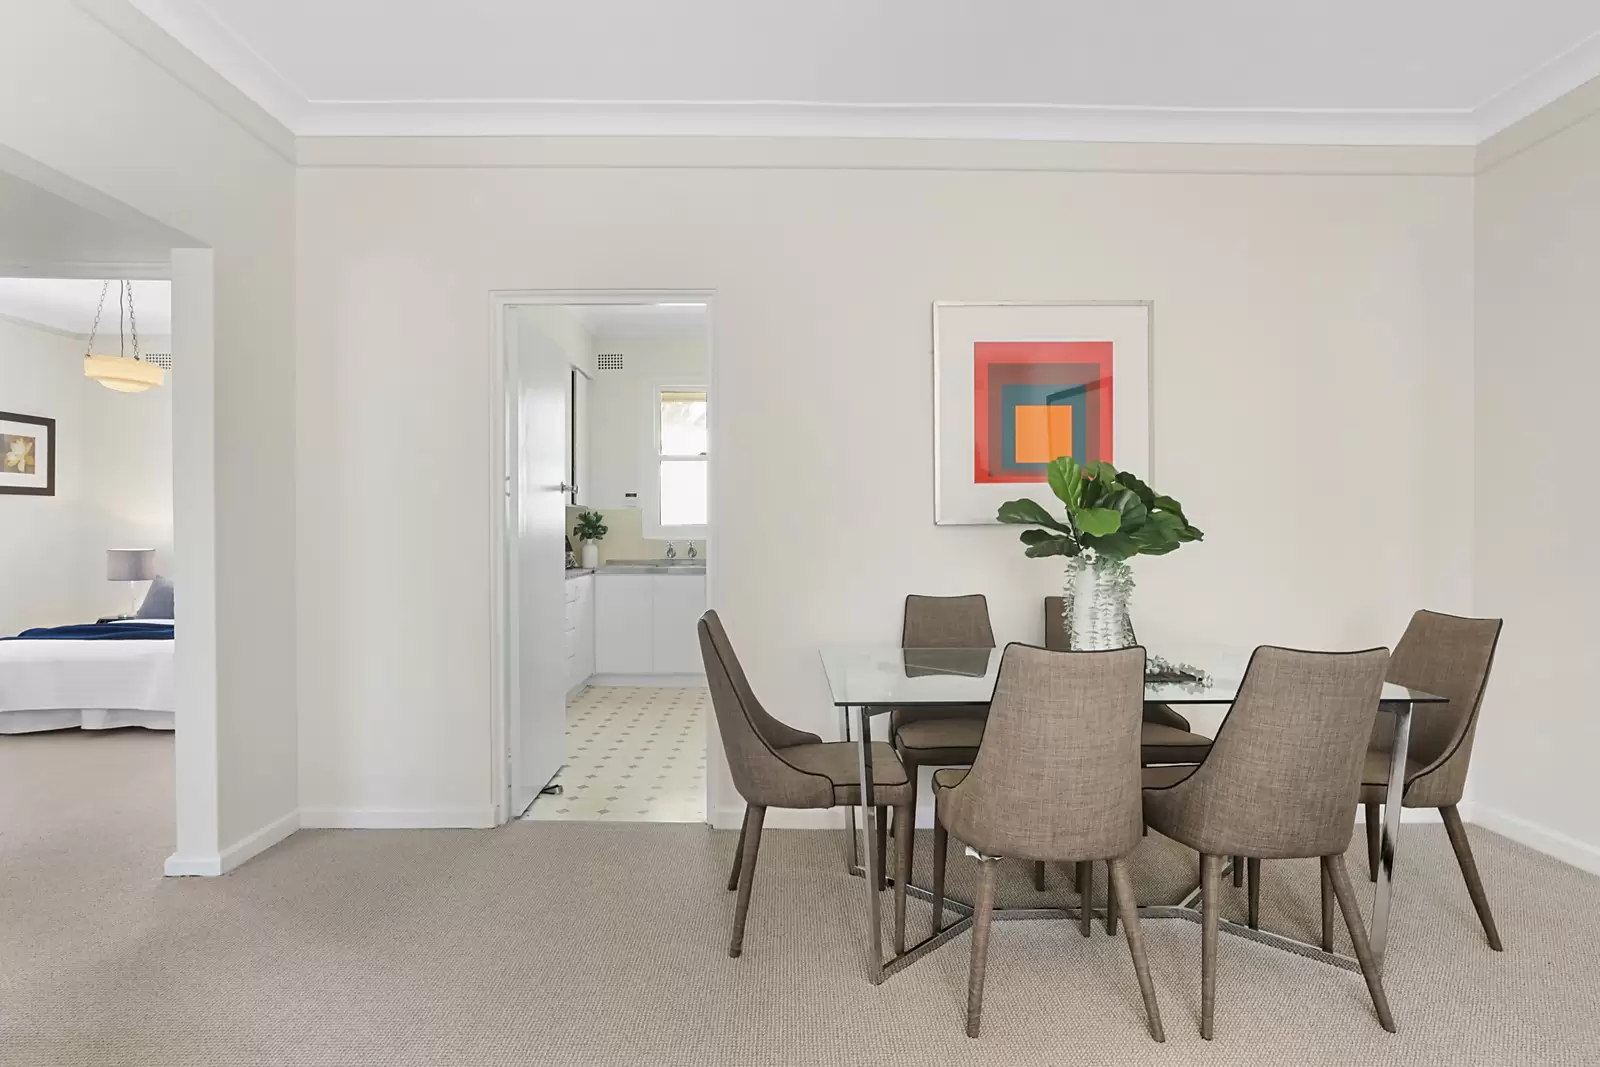 Photo #4: 4/4 Young Street, Vaucluse - Sold by Sydney Sotheby's International Realty